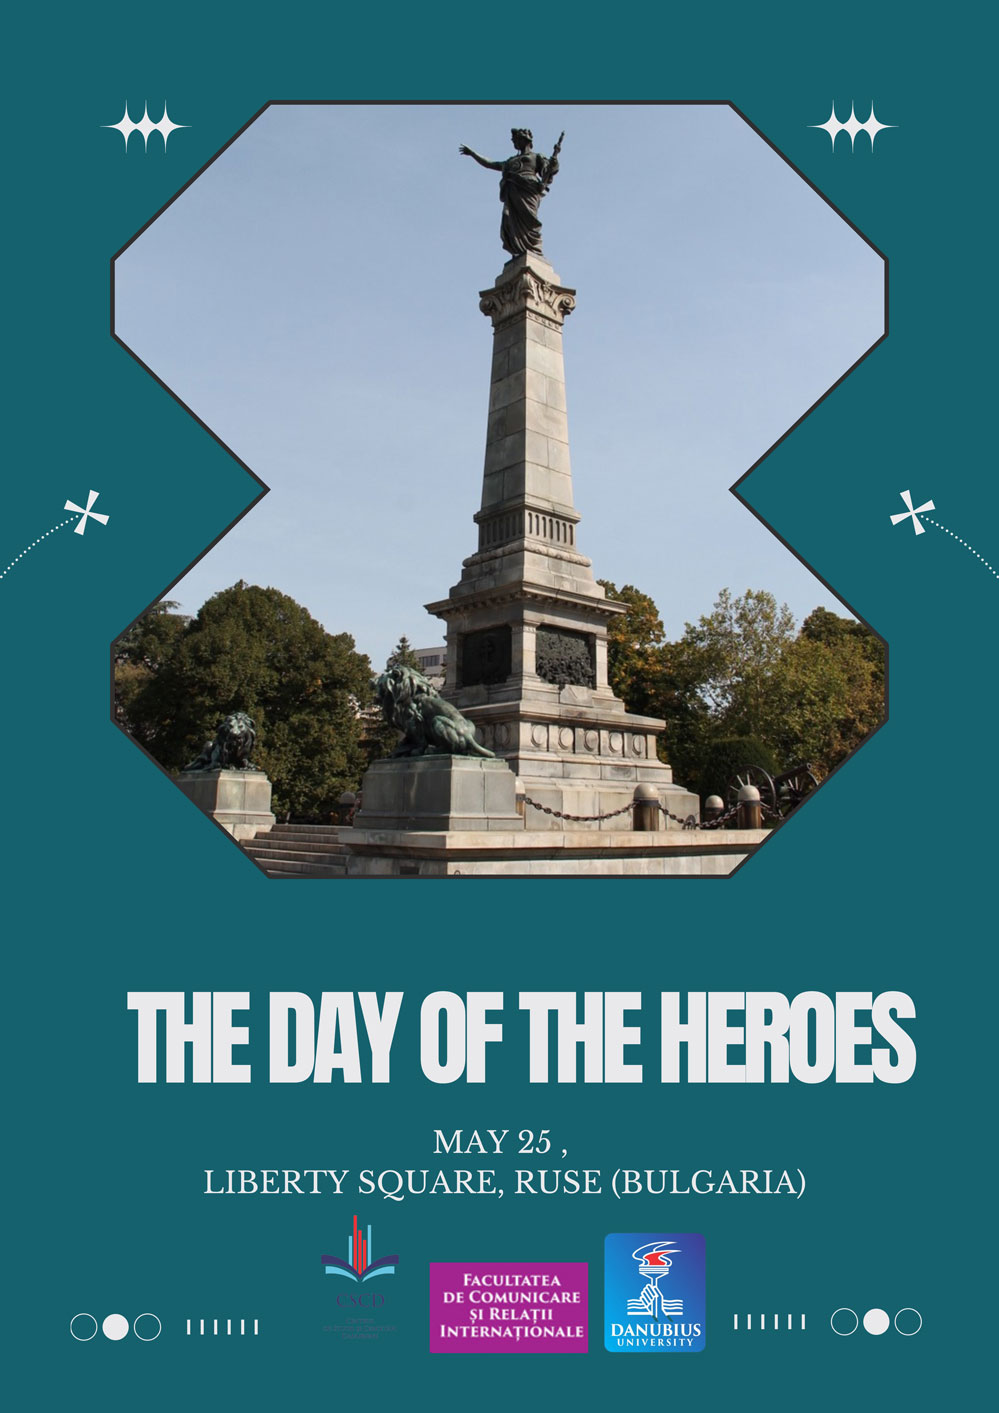 THE DAY OF HEROES CELEBRATED BY DANUBIUS UNIVERSITY